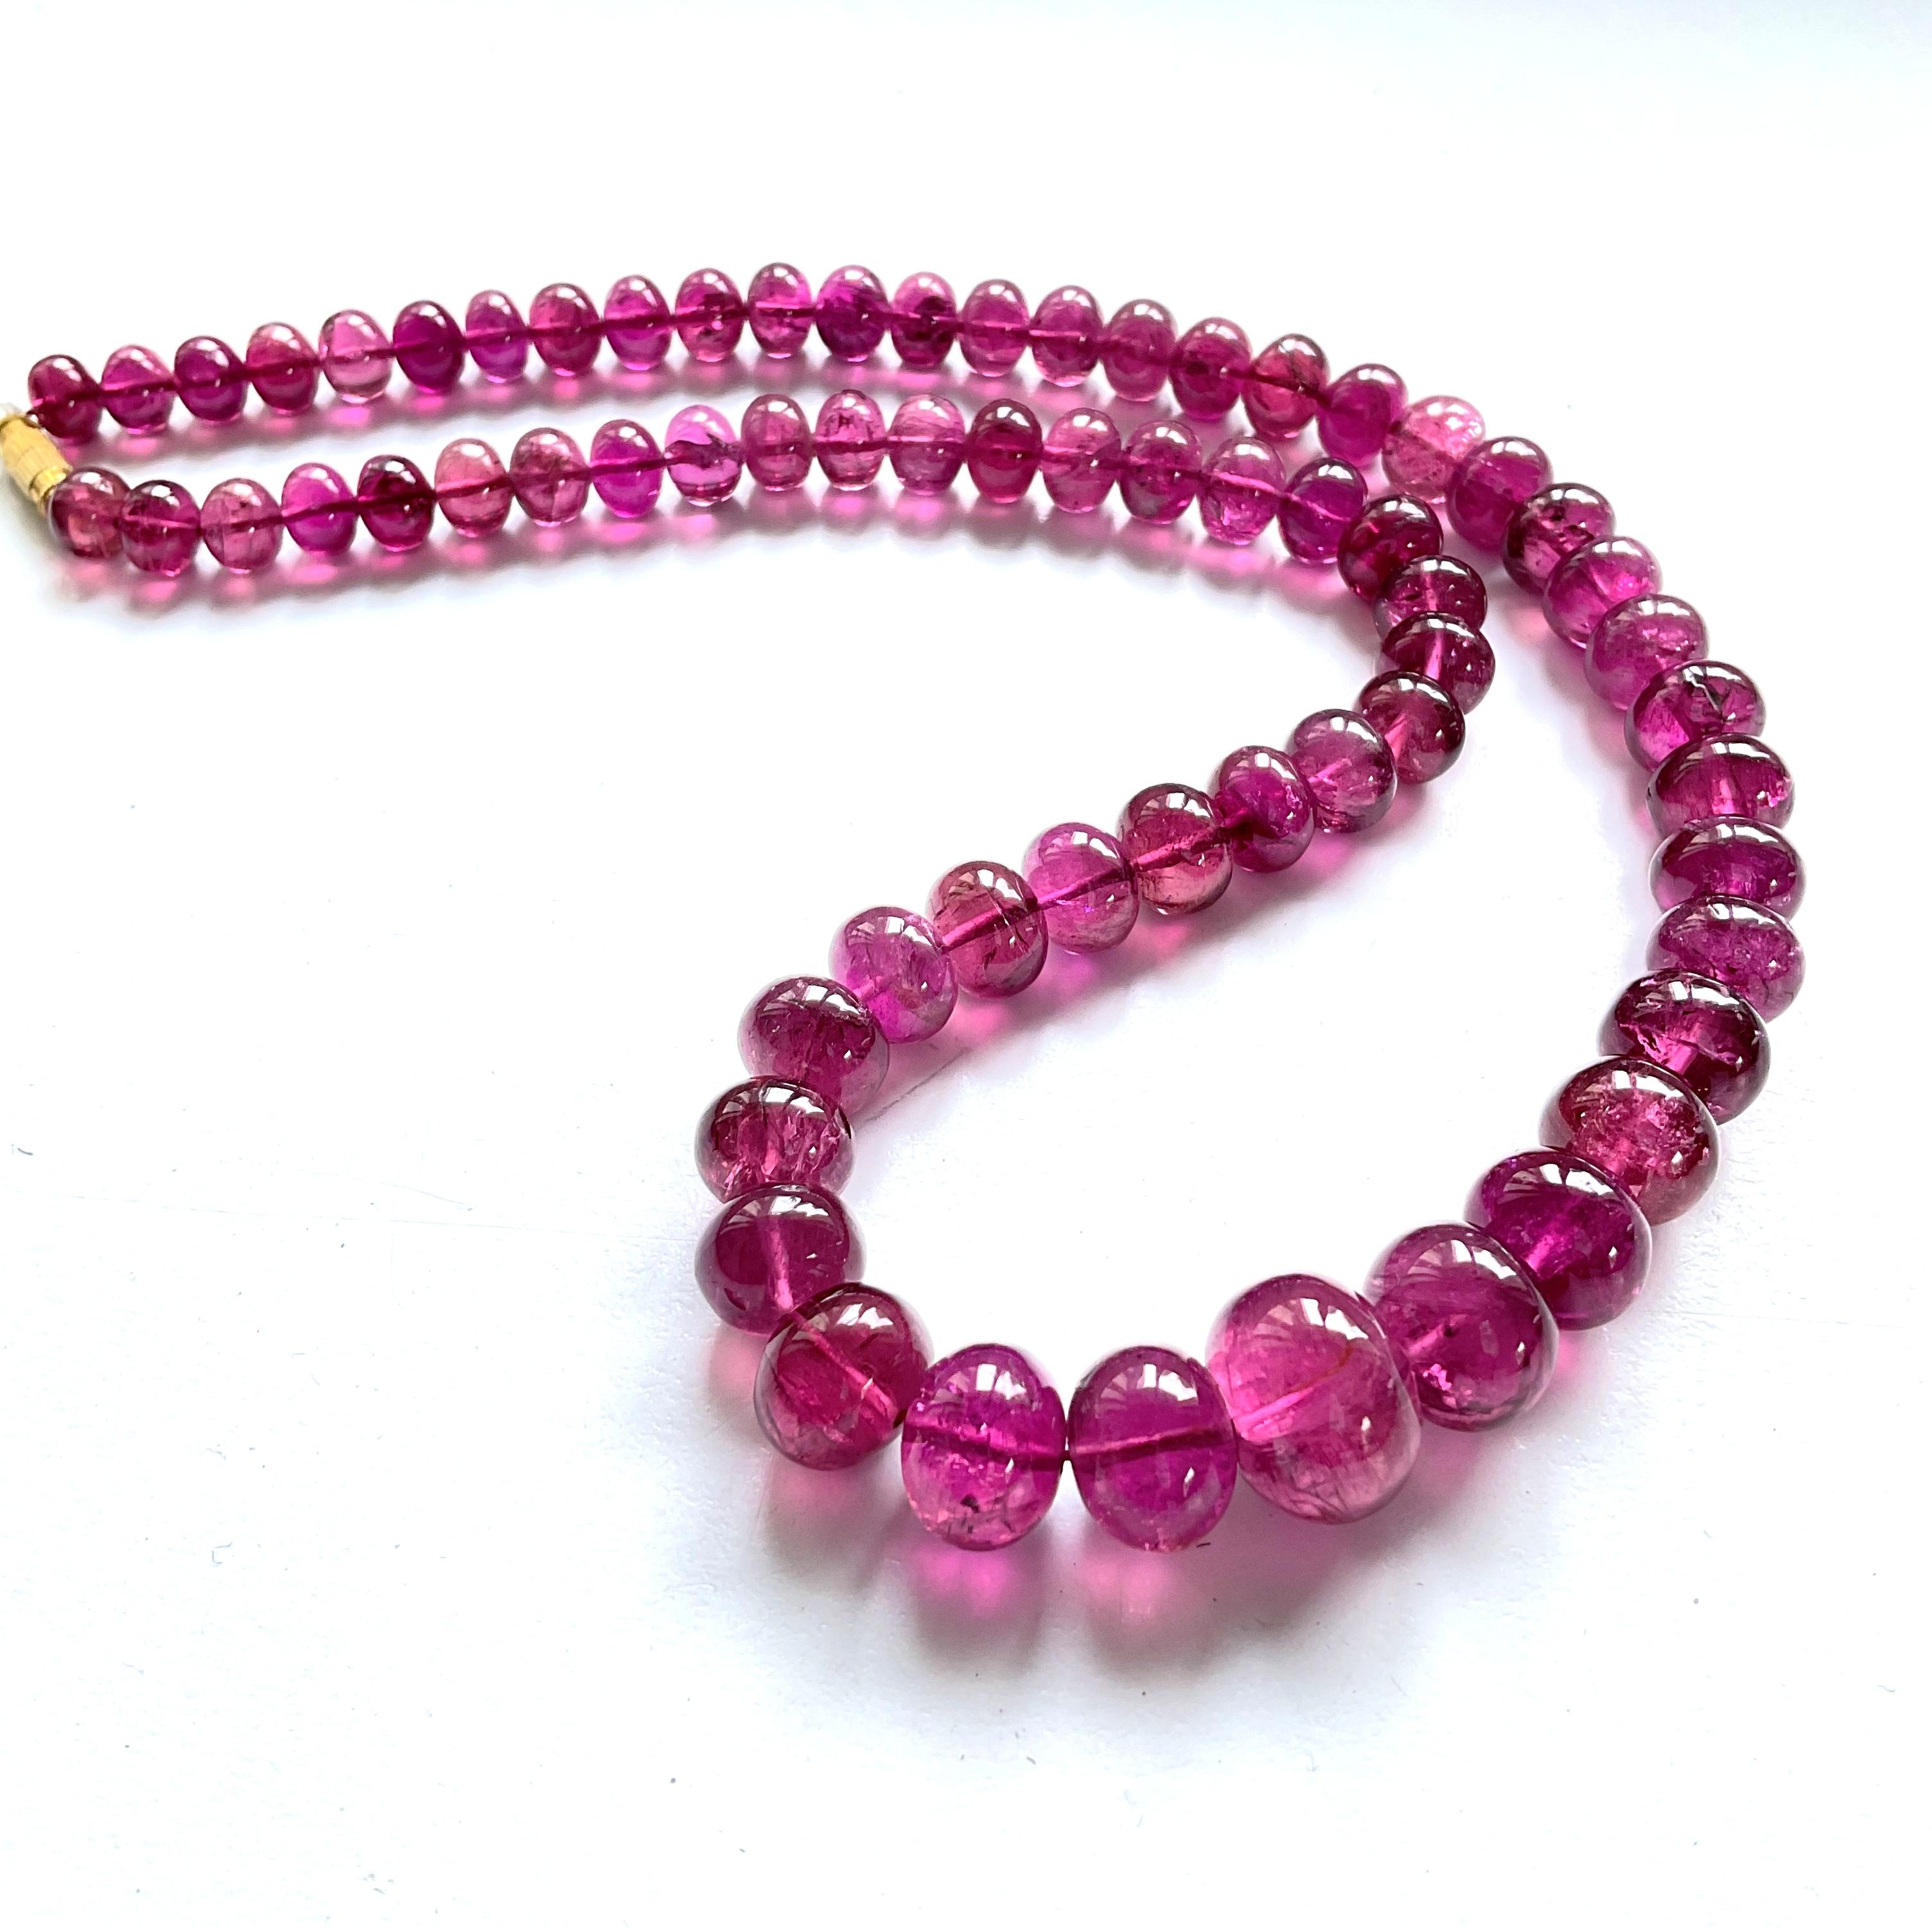 335.01 Carats Top Quality Rubellite Tourmaline Beads Natural Gemstones necklace In New Condition For Sale In Jaipur, RJ